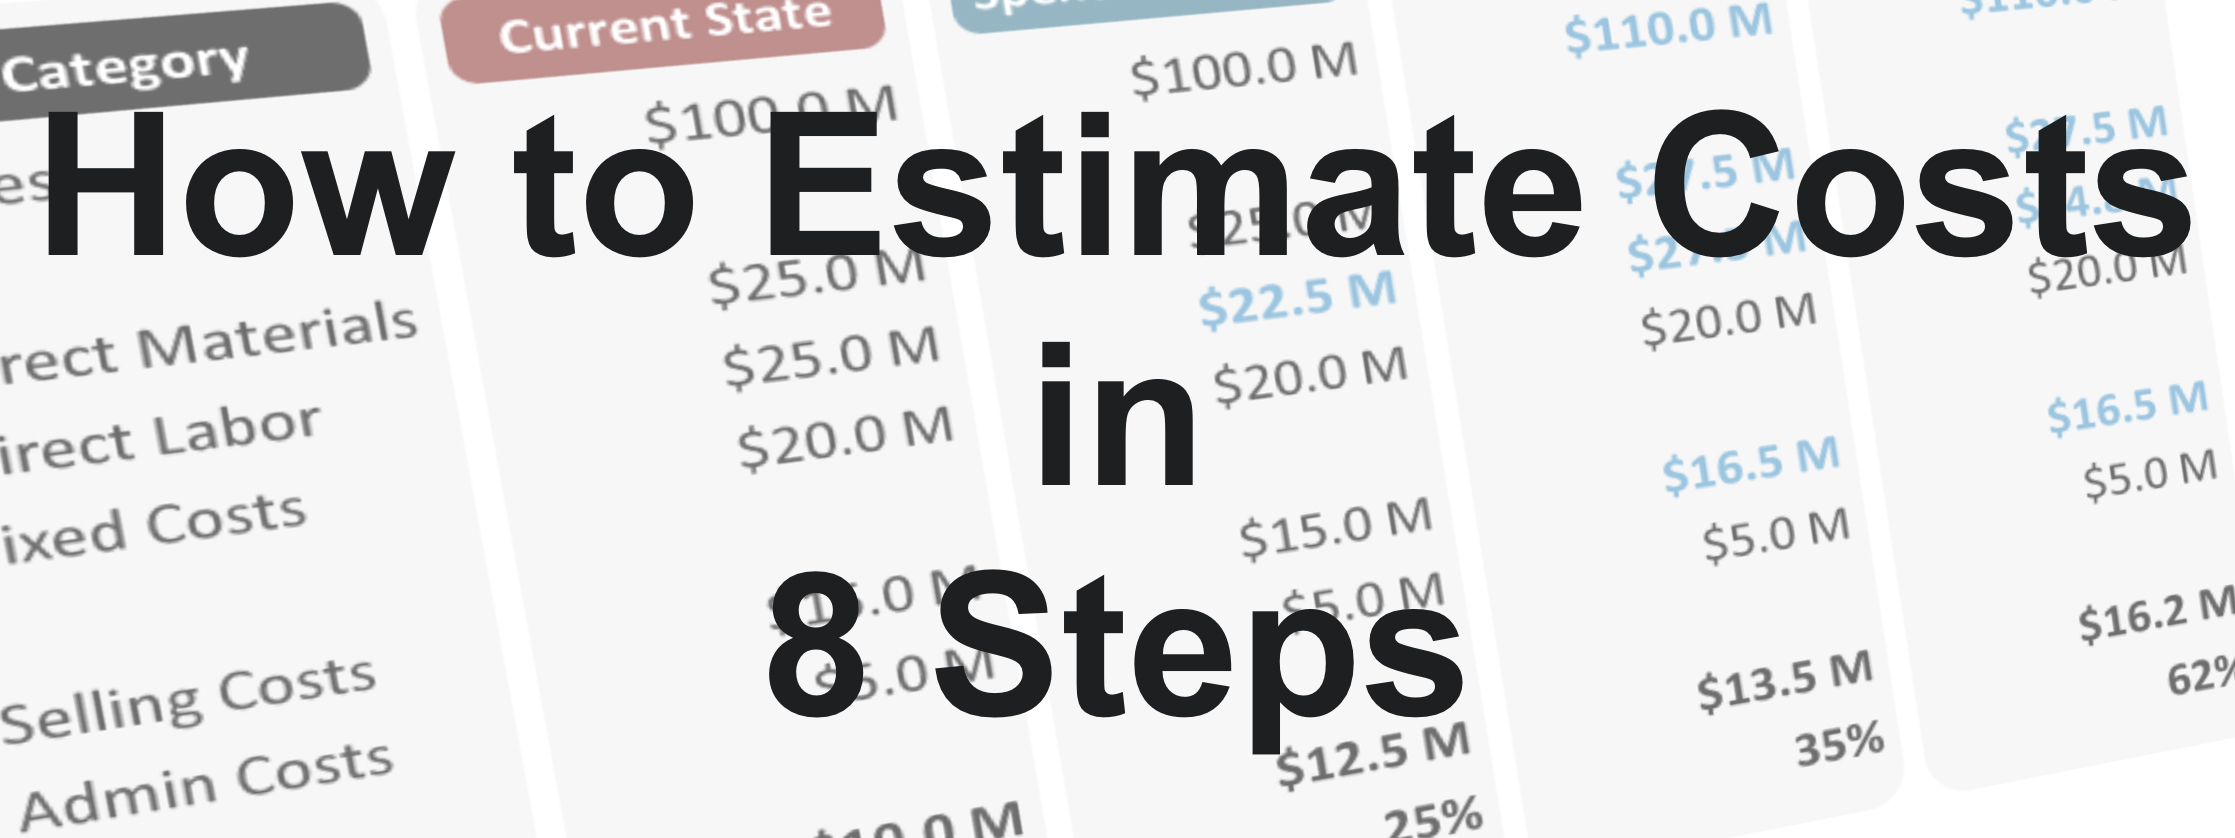 How to Estimate Costs in 8 Steps